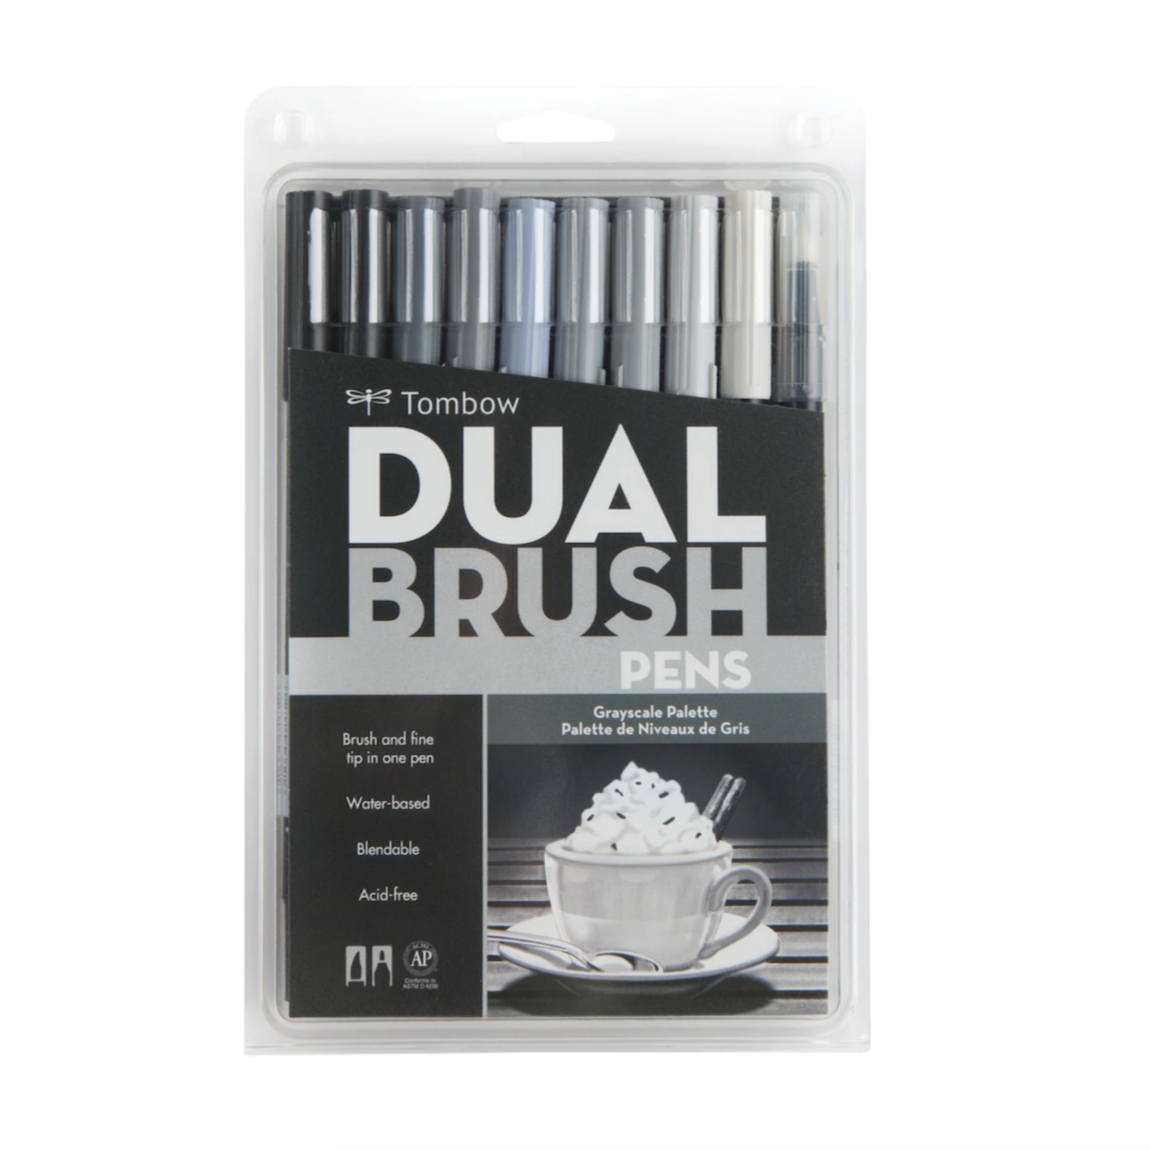 Tombow Dual Brush Pens - Set of 10 - Grayscale Palette by Tombow - K. A. Artist Shop